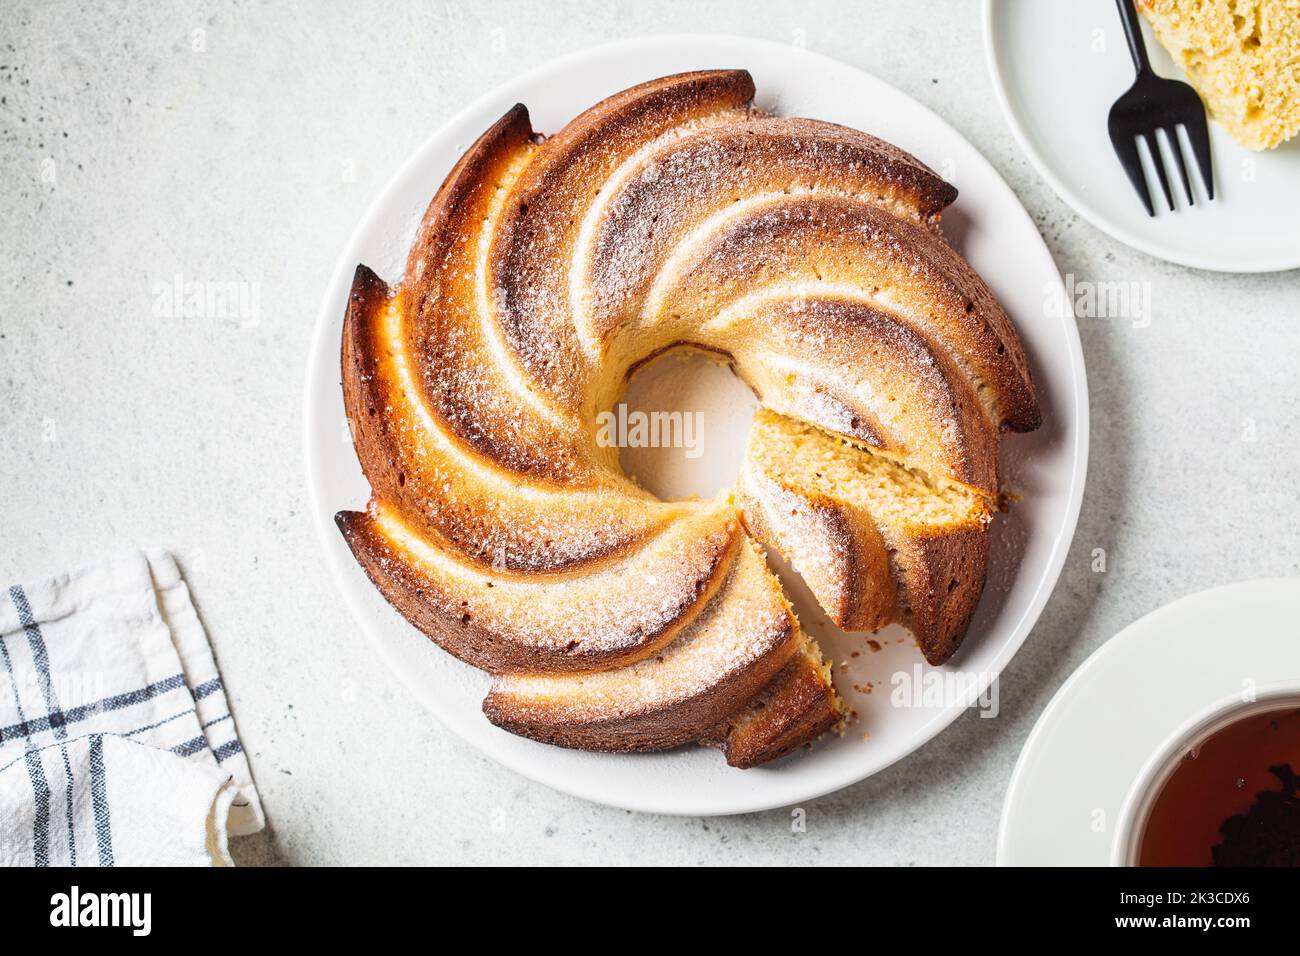 Flat lay of vanilla pound cake with powdered sugar on a white plate on light gray background. Stock Photo